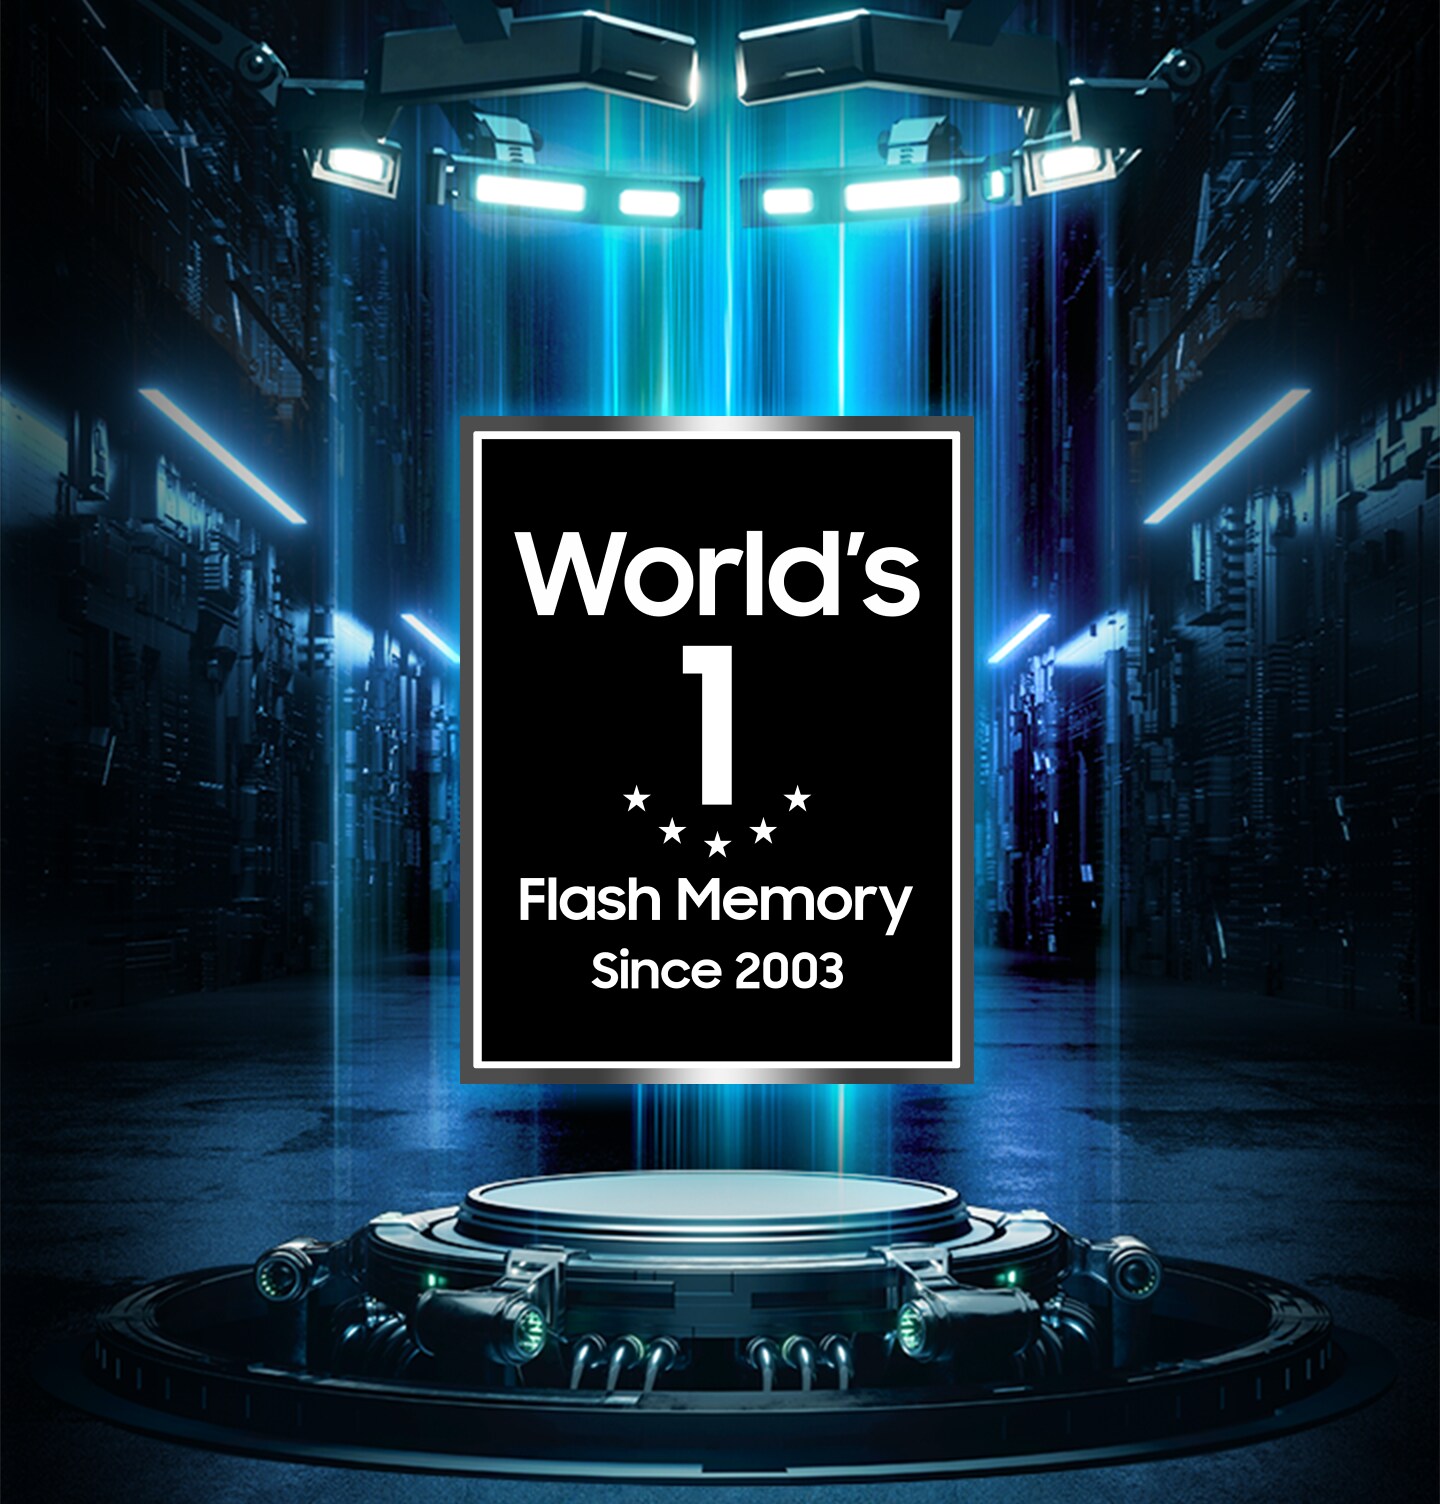 Samsung Semiconductor has been recognized as the world's top flash memory brand since 2003.